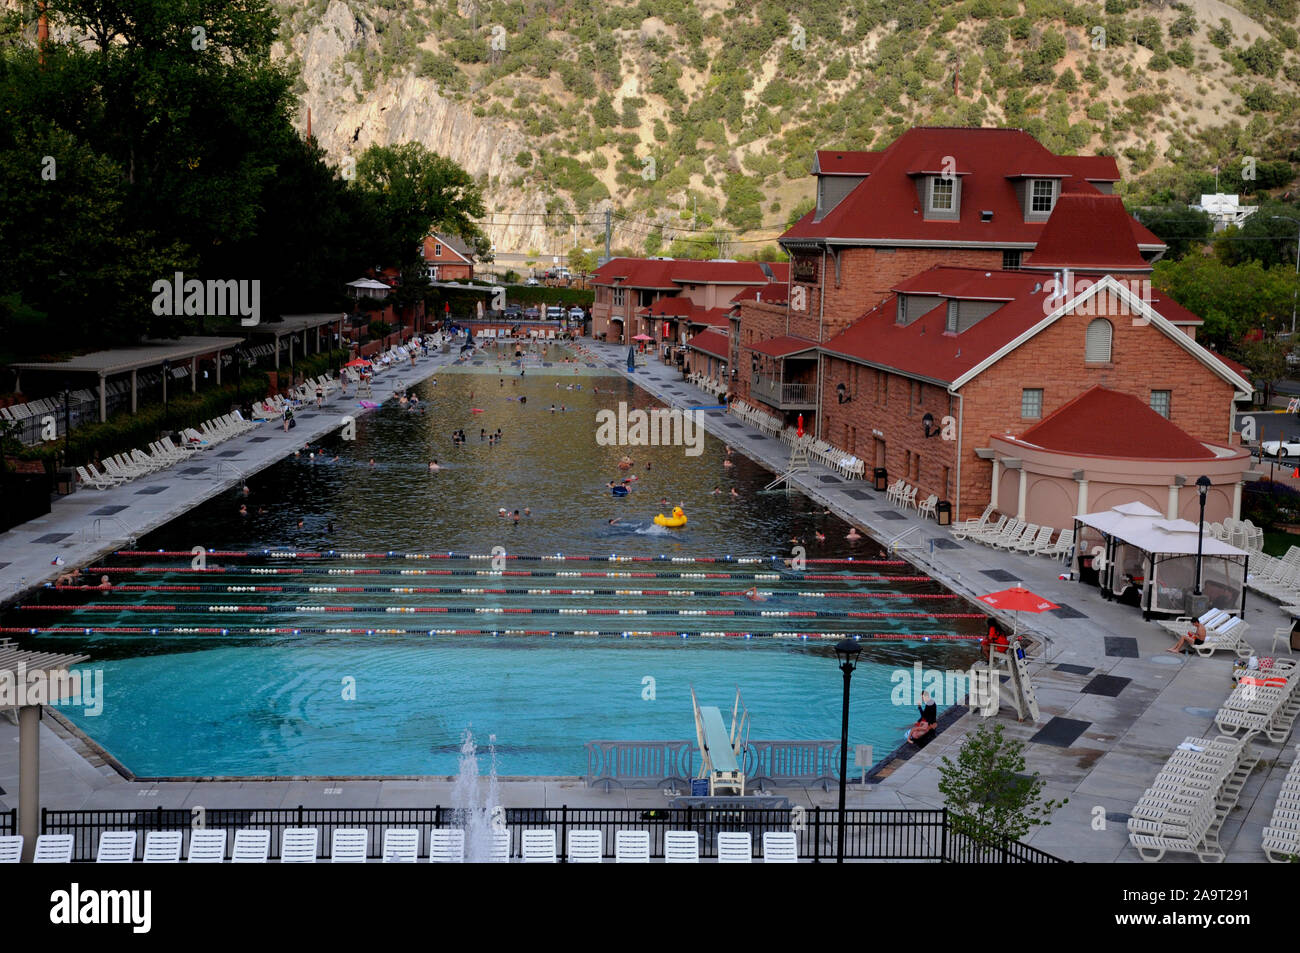 The main pool area at Glenwood Hot Springs Resort Colorado Rockies. It's an all year round resort famous for its hot springs. Stock Photo